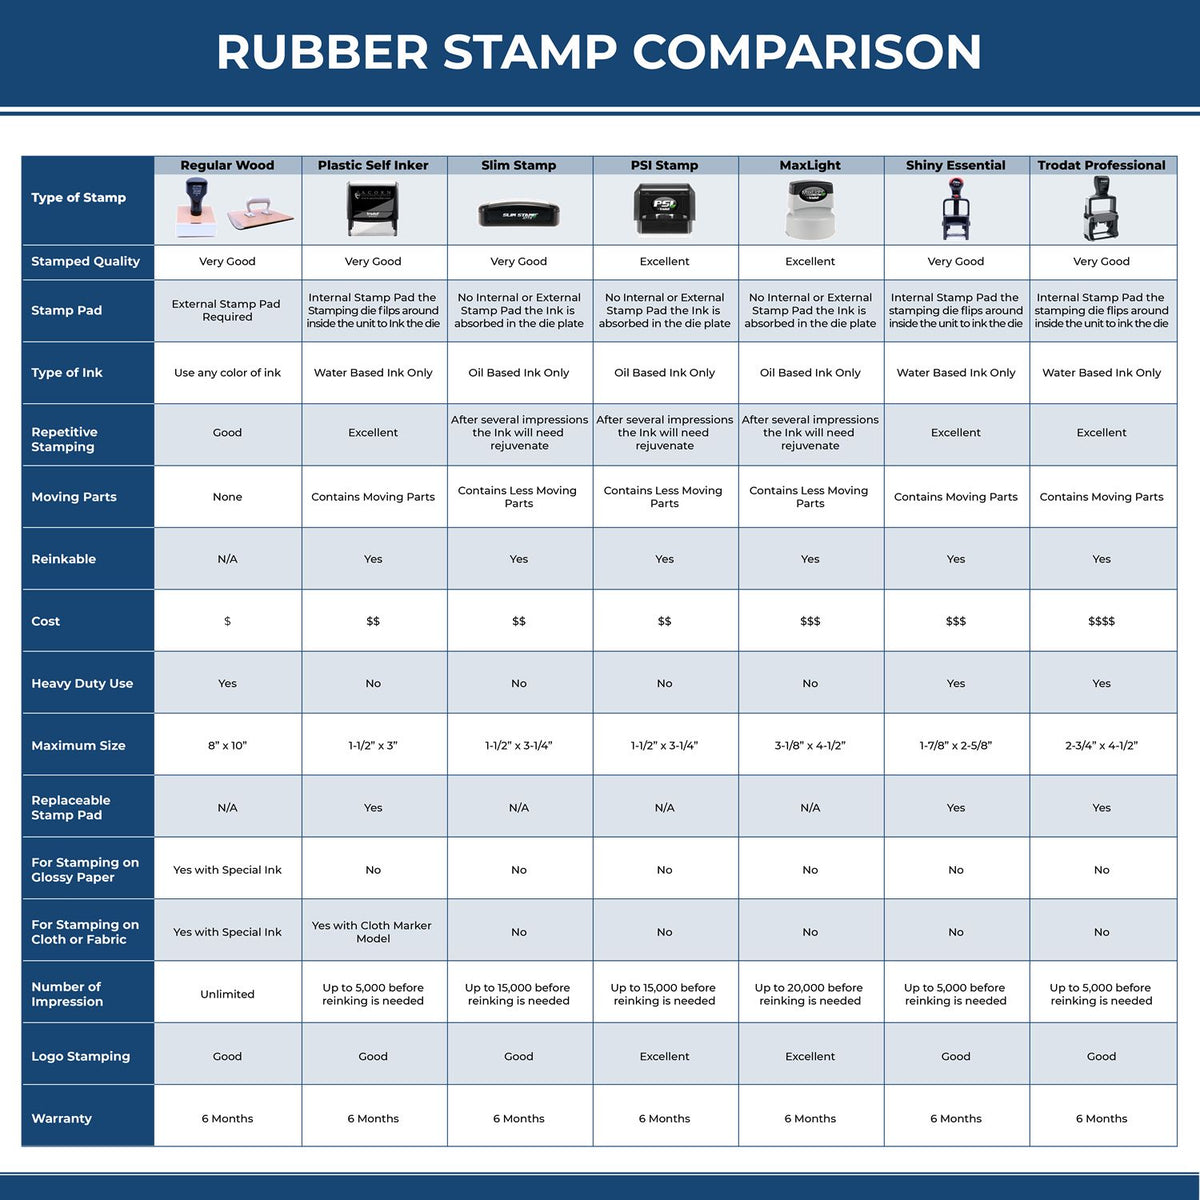 Large Self-Inking Received with Box Stamp 5650S Rubber Stamp Comparison